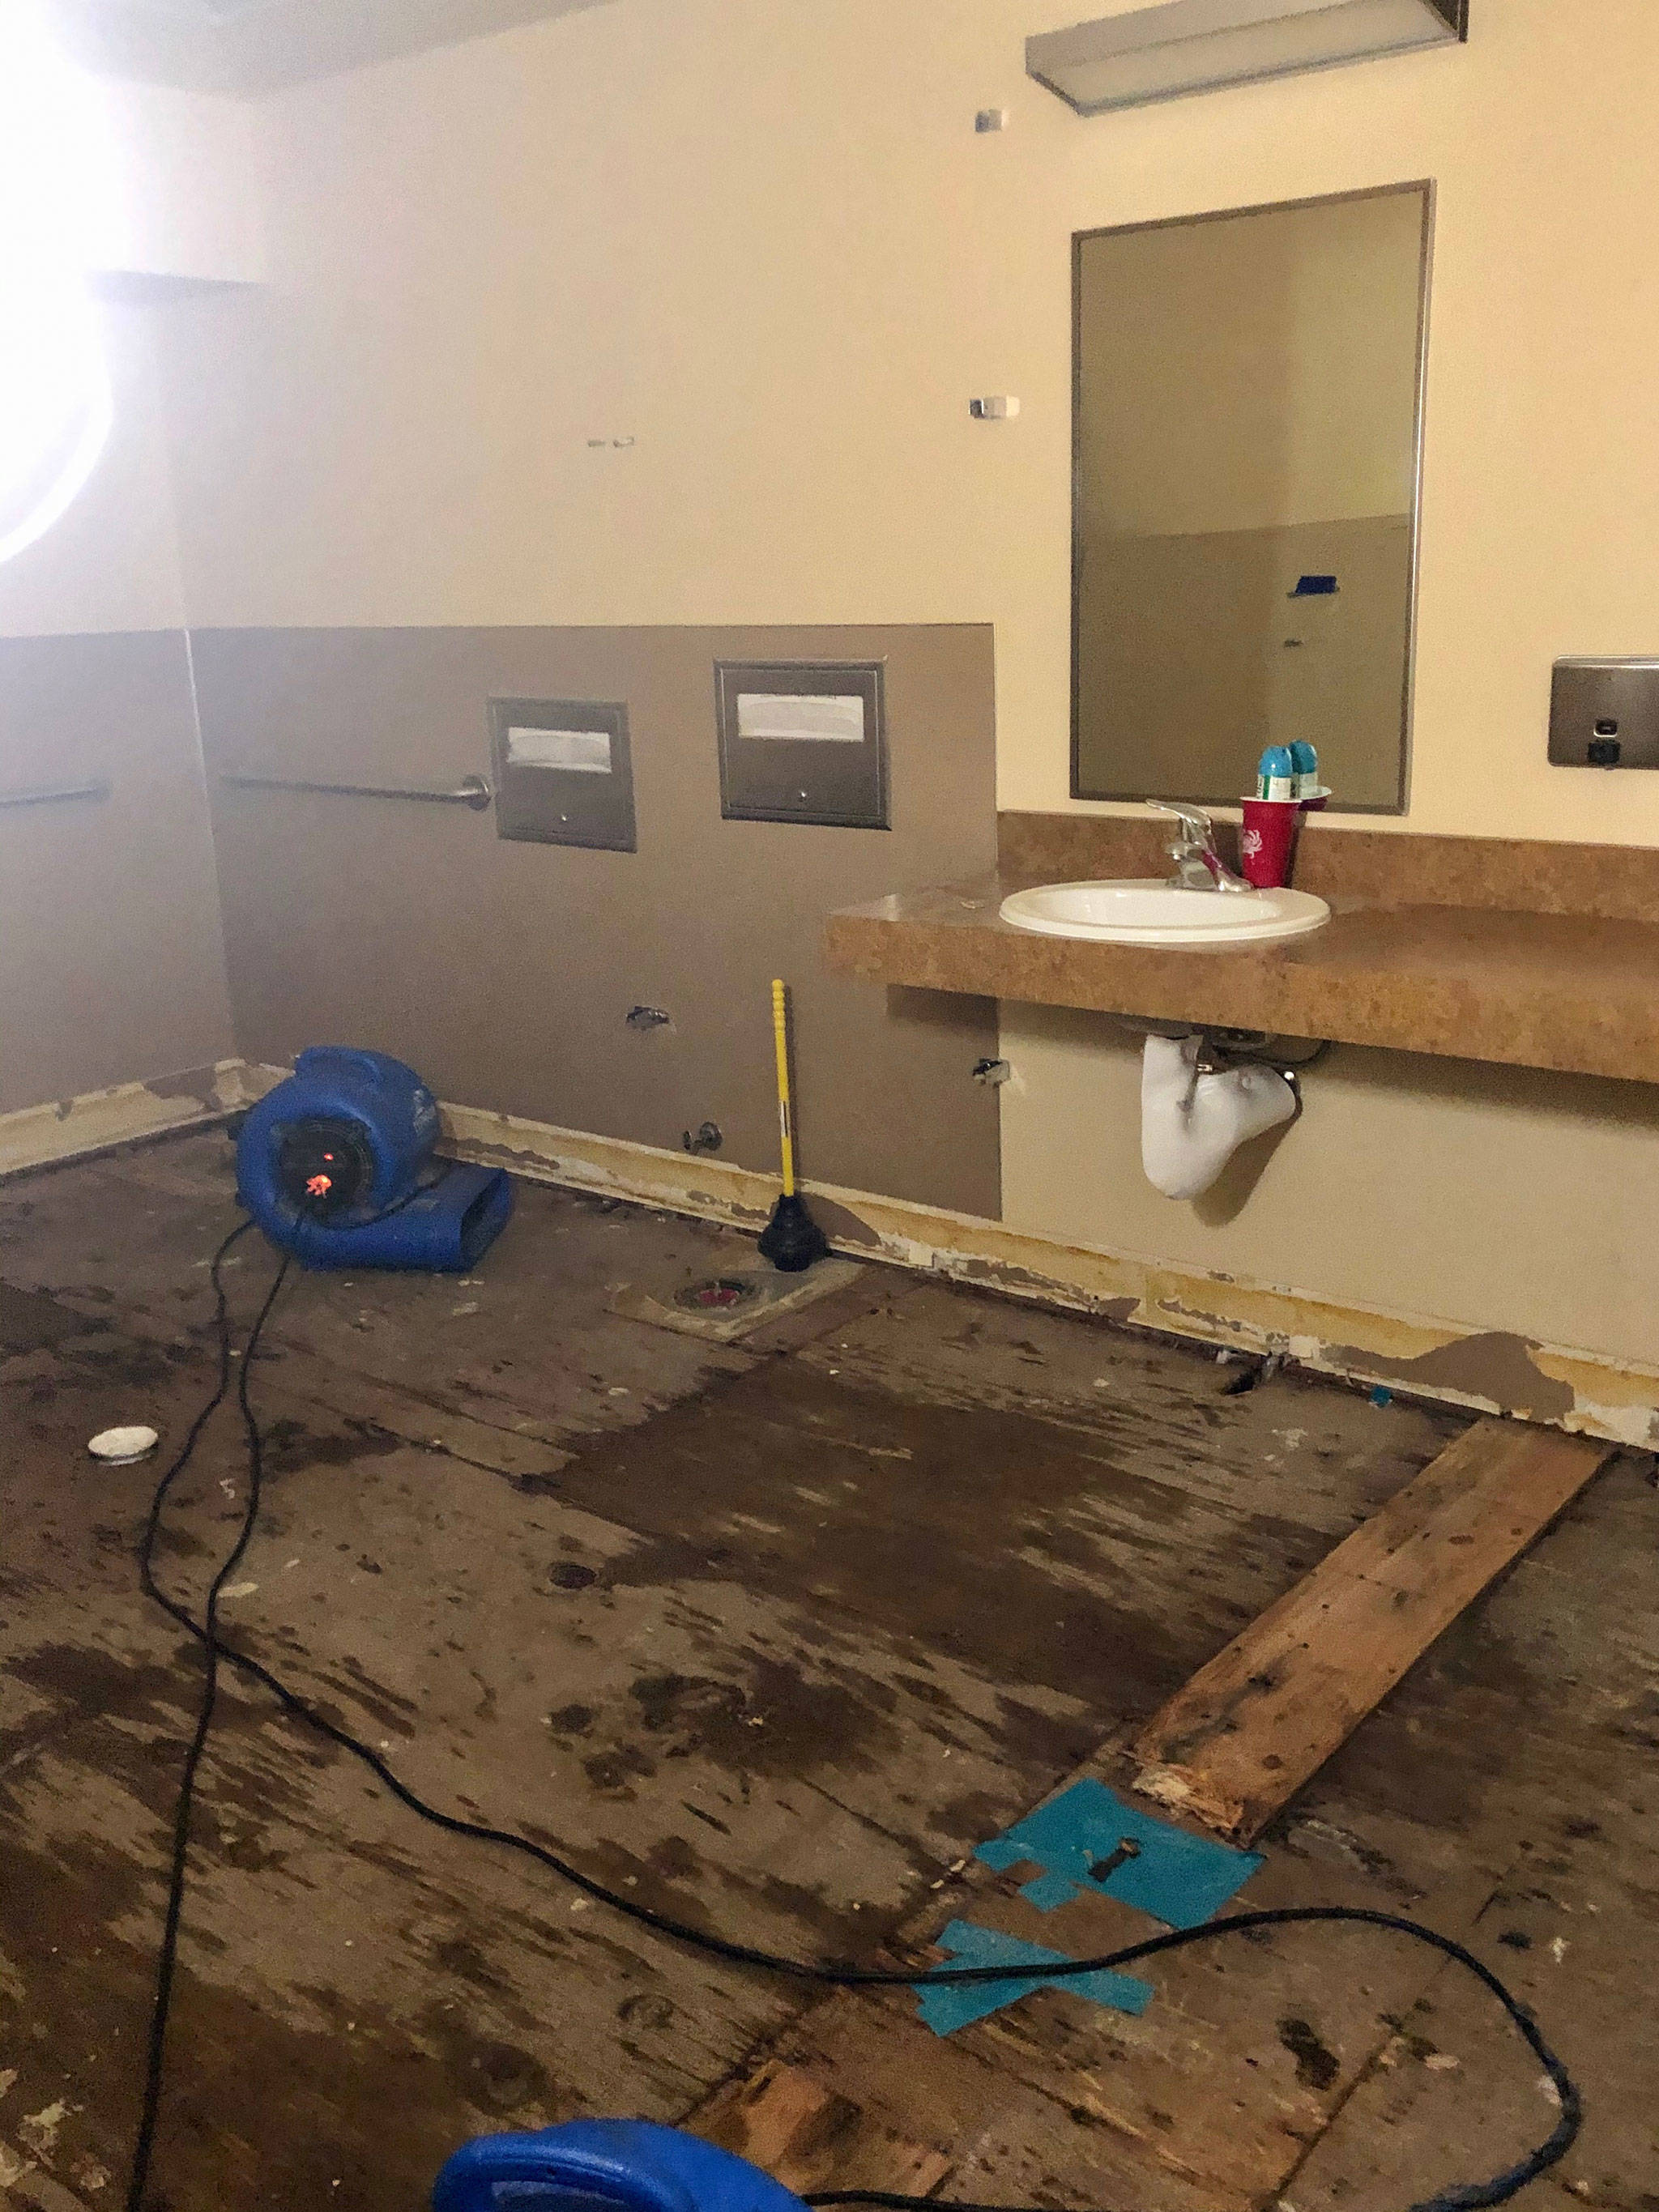 Flooding damaged many rooms in Sequim’s Sound Community Bank branch on Dec. 7. More water damage occurred on Dec. 20 causing issues with the building’s electrical system causing staff to shut the branch down. Photo courtesy of Sound Community Bank